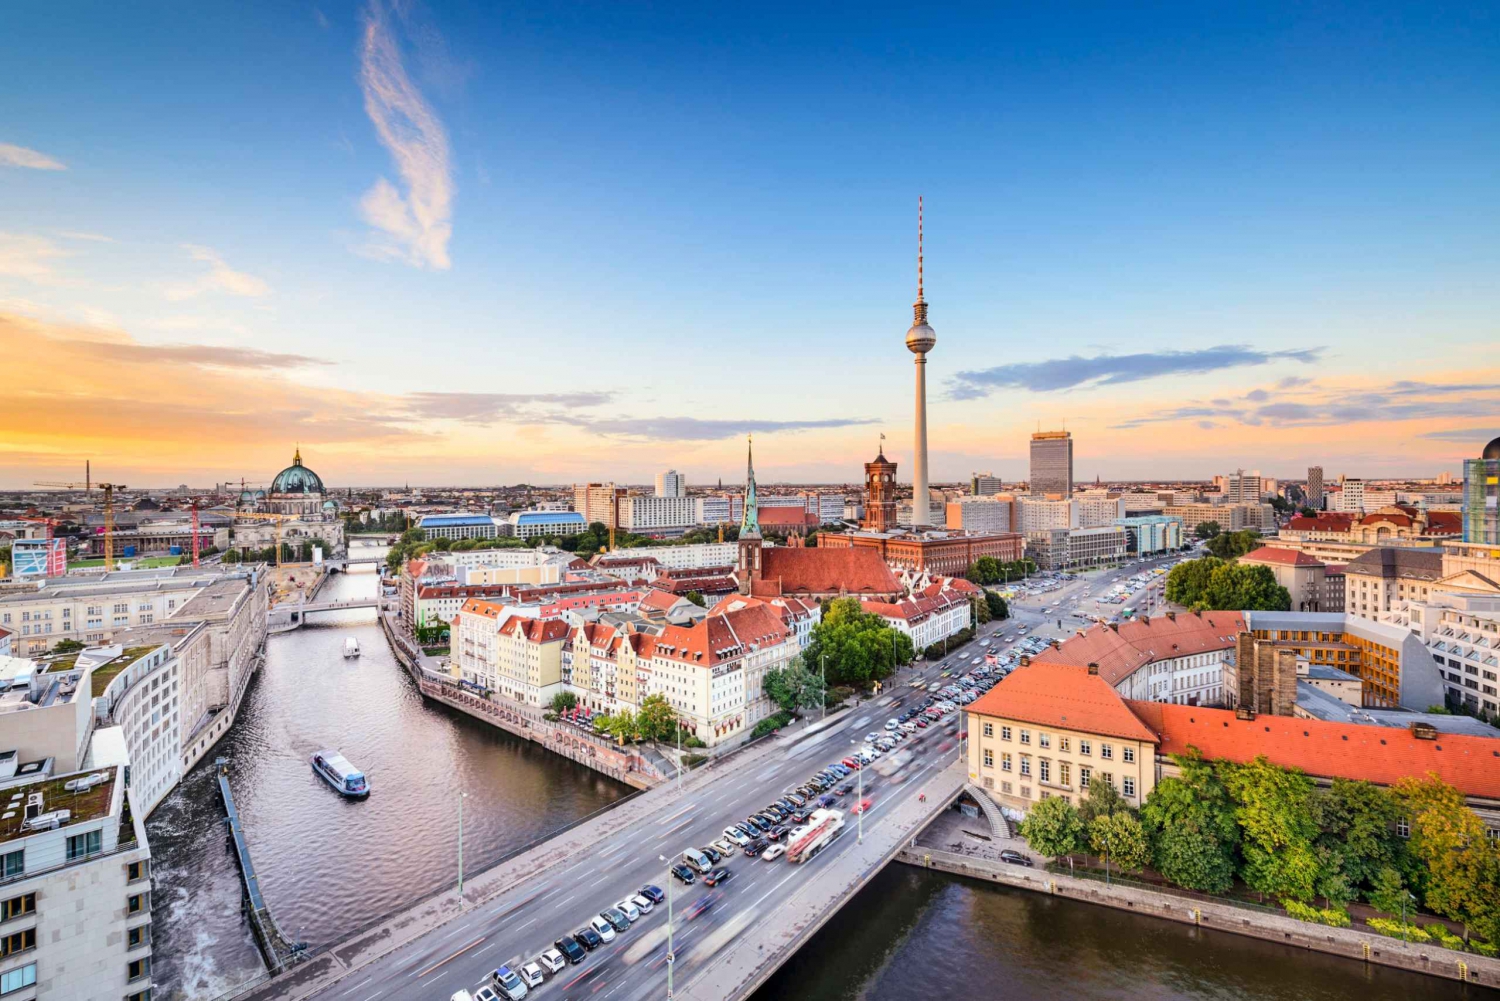 Berlin: Self-Guided Audio Tour on Your Phone